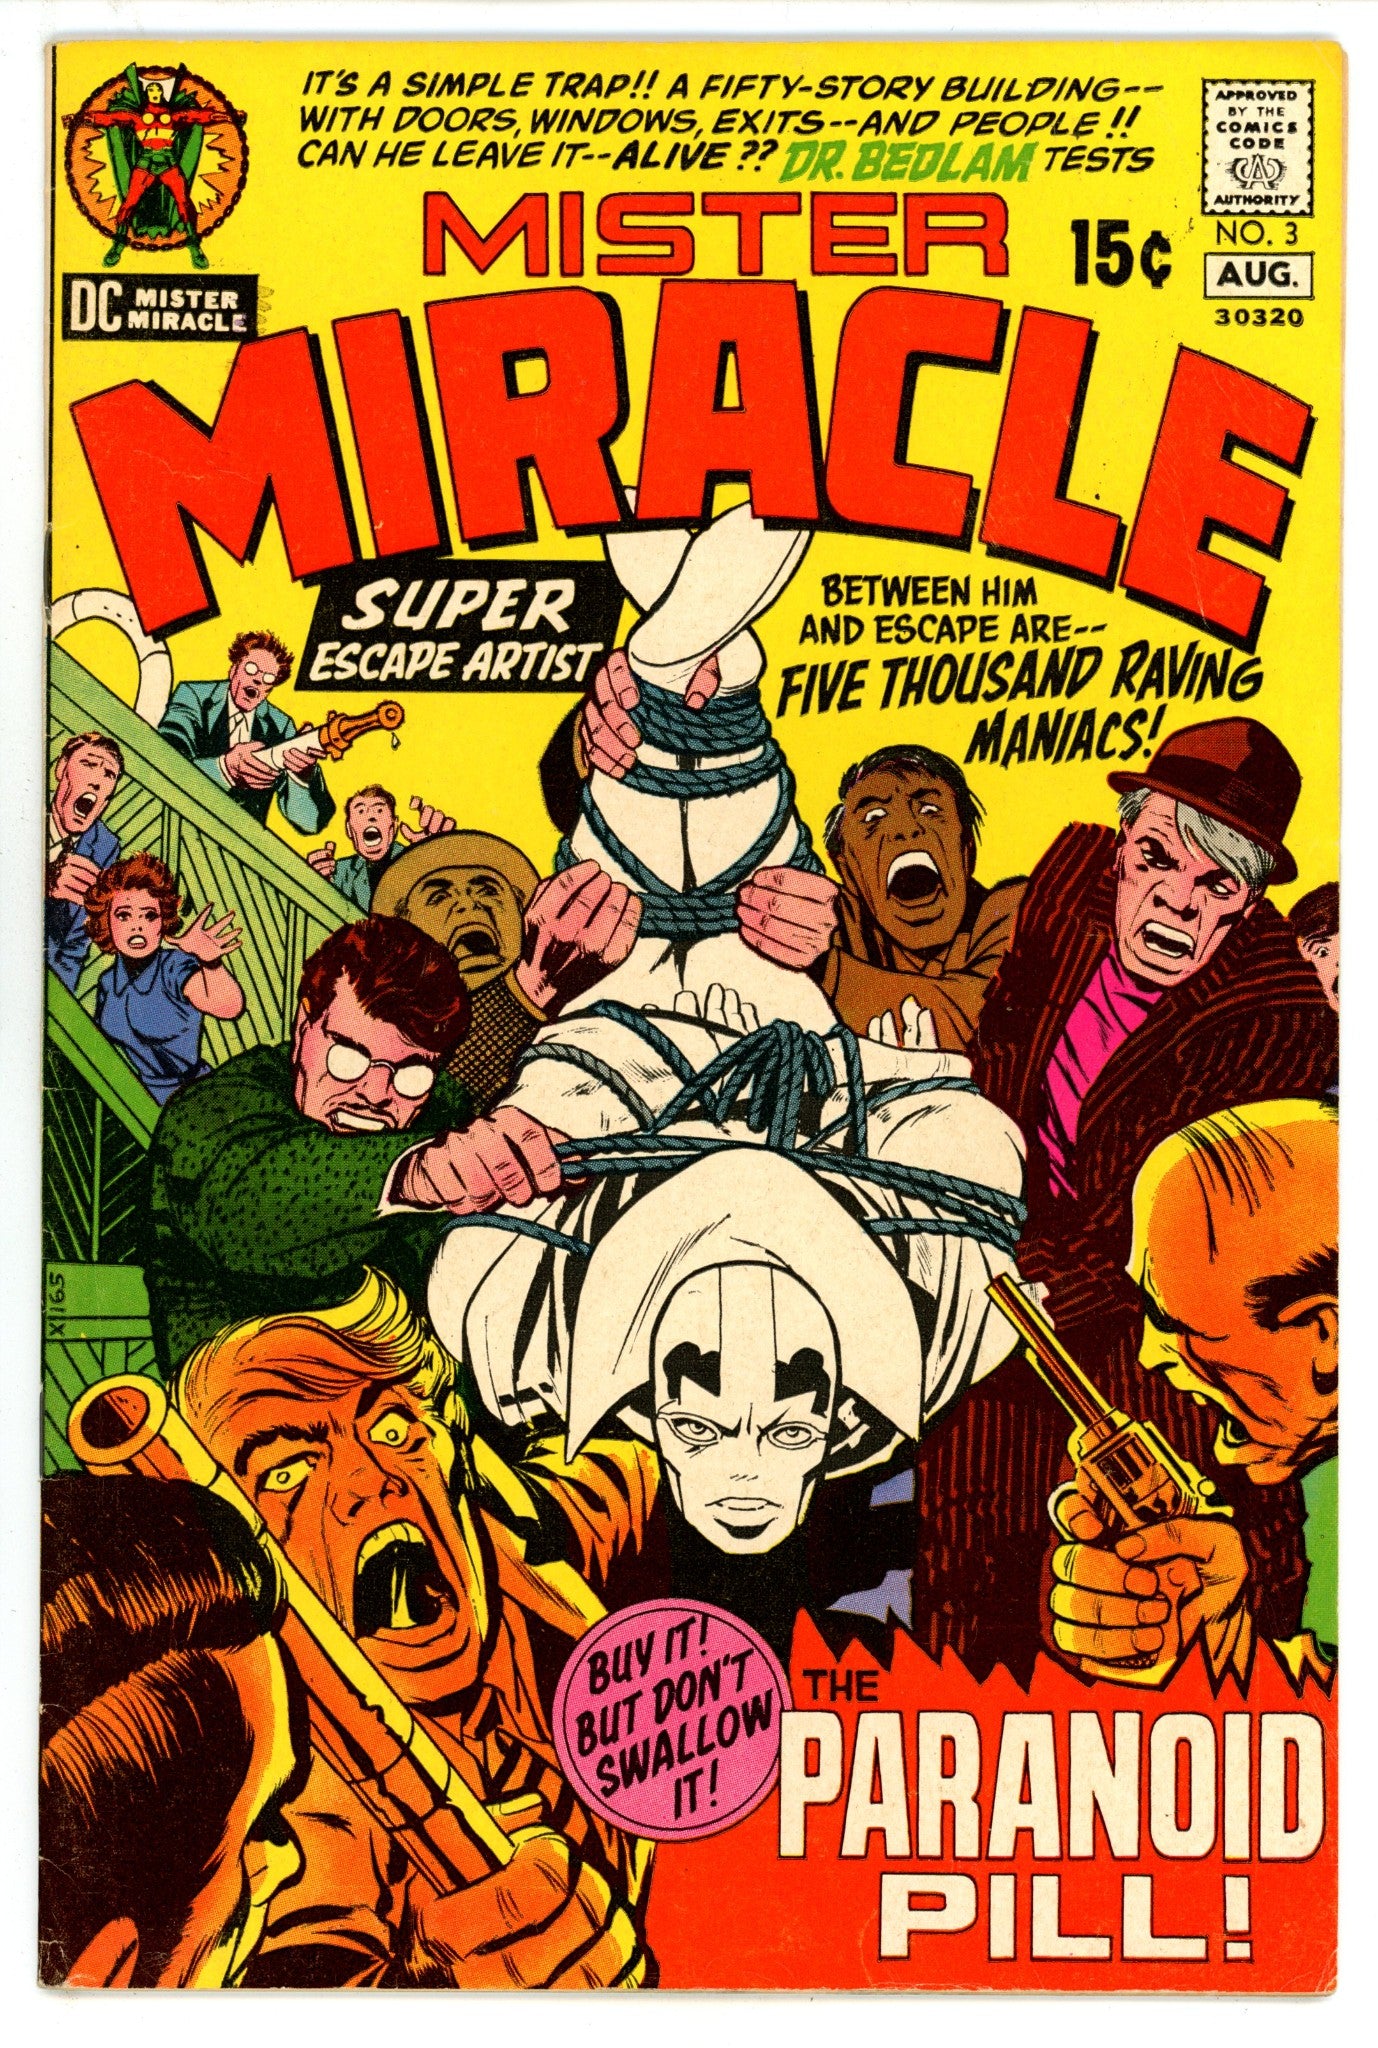 Mister Miracle Vol 1 3 FN (6.0) (1971) 